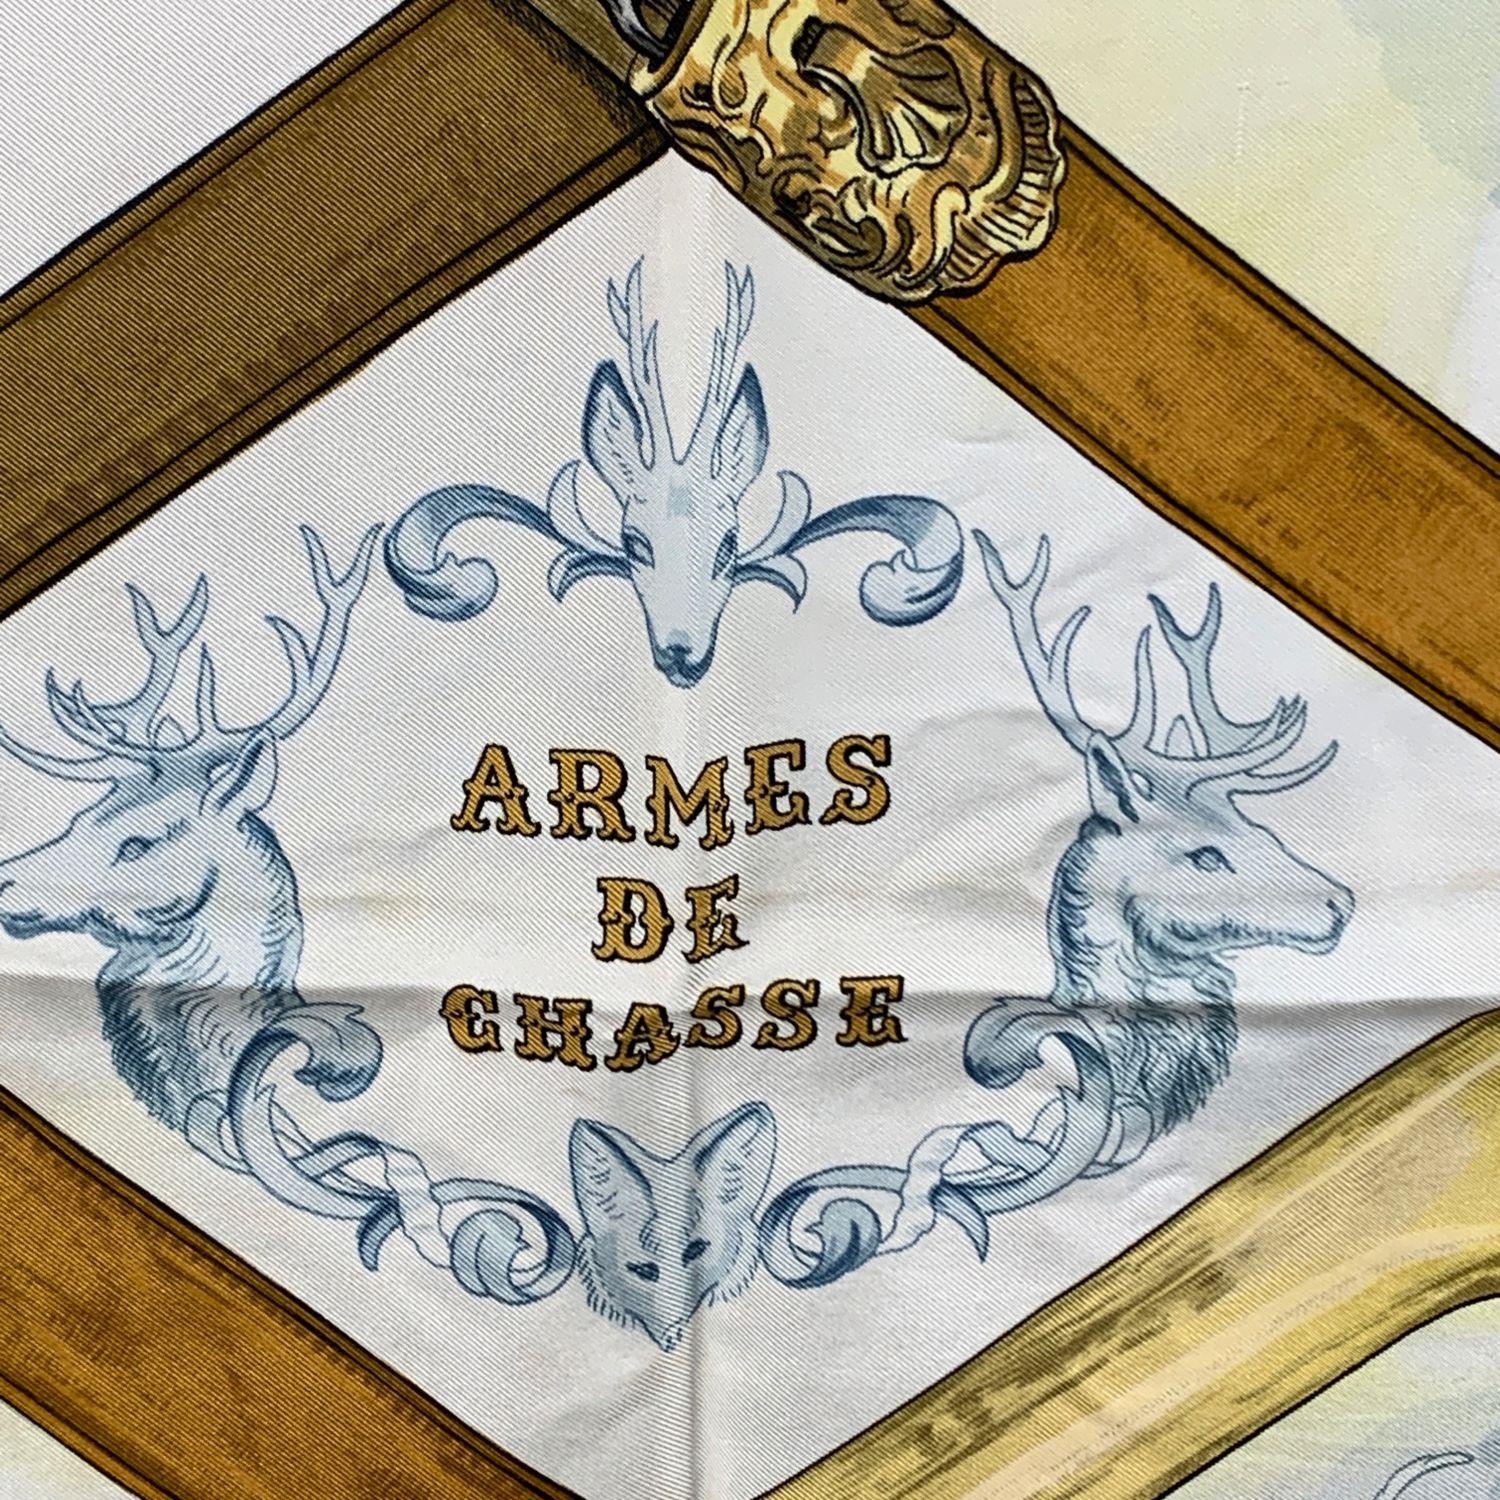 HERMES Silk scarf named 'ARMES DE CHASSE', created by artist Philippe Ledoux. A classic print showcasing military swords.